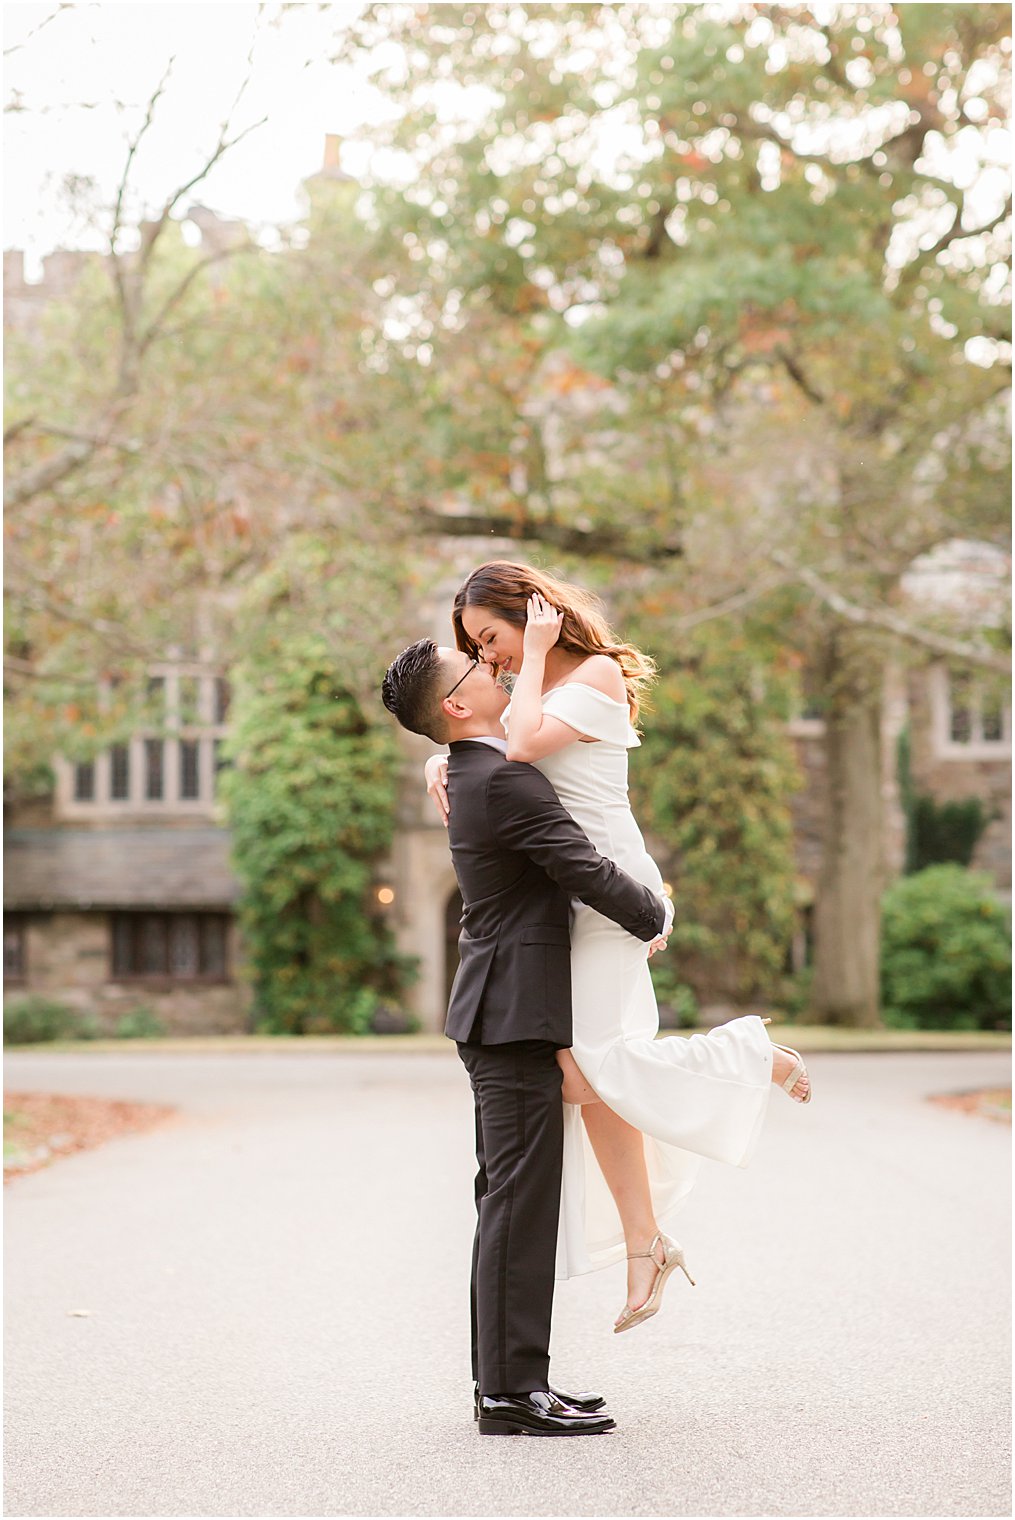 Groom lifting bride for engagement photos